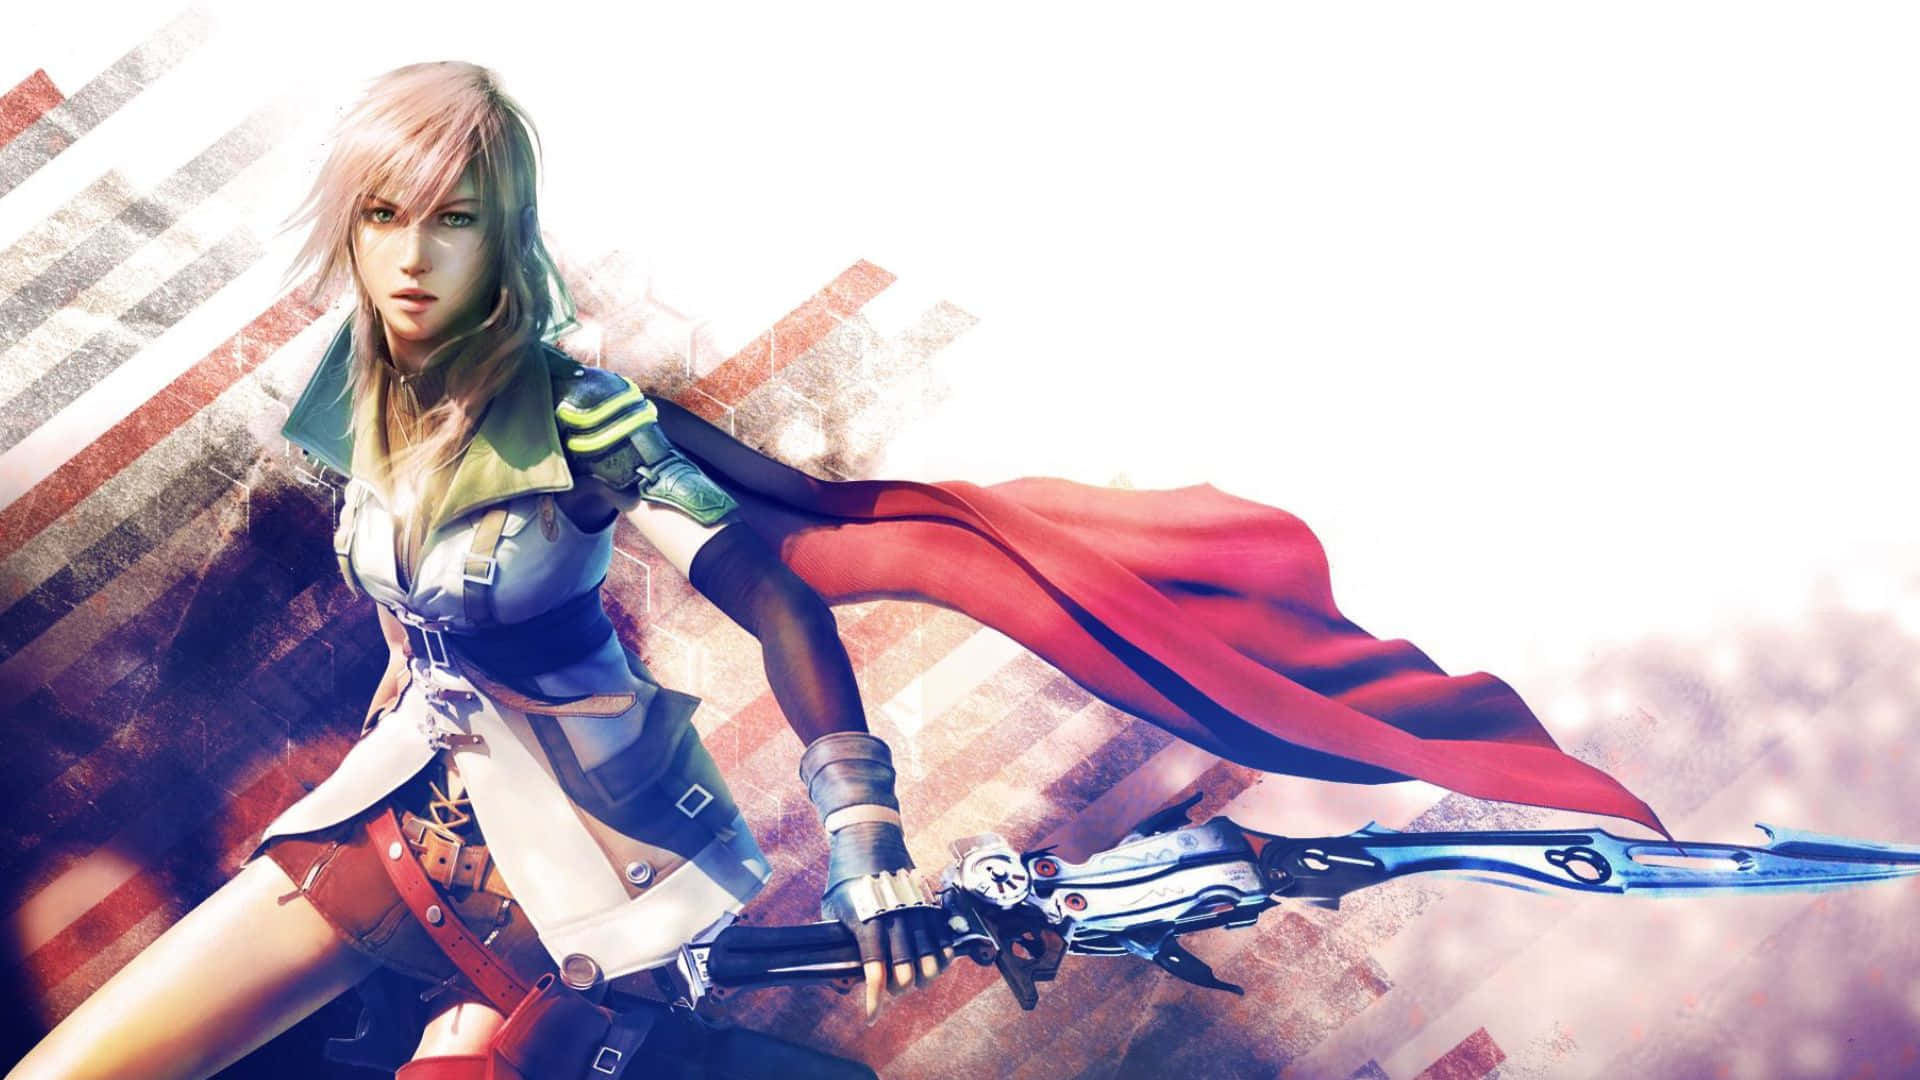 Lightning From Final Fantasy Xiii - Unveiling Her Power Wallpaper